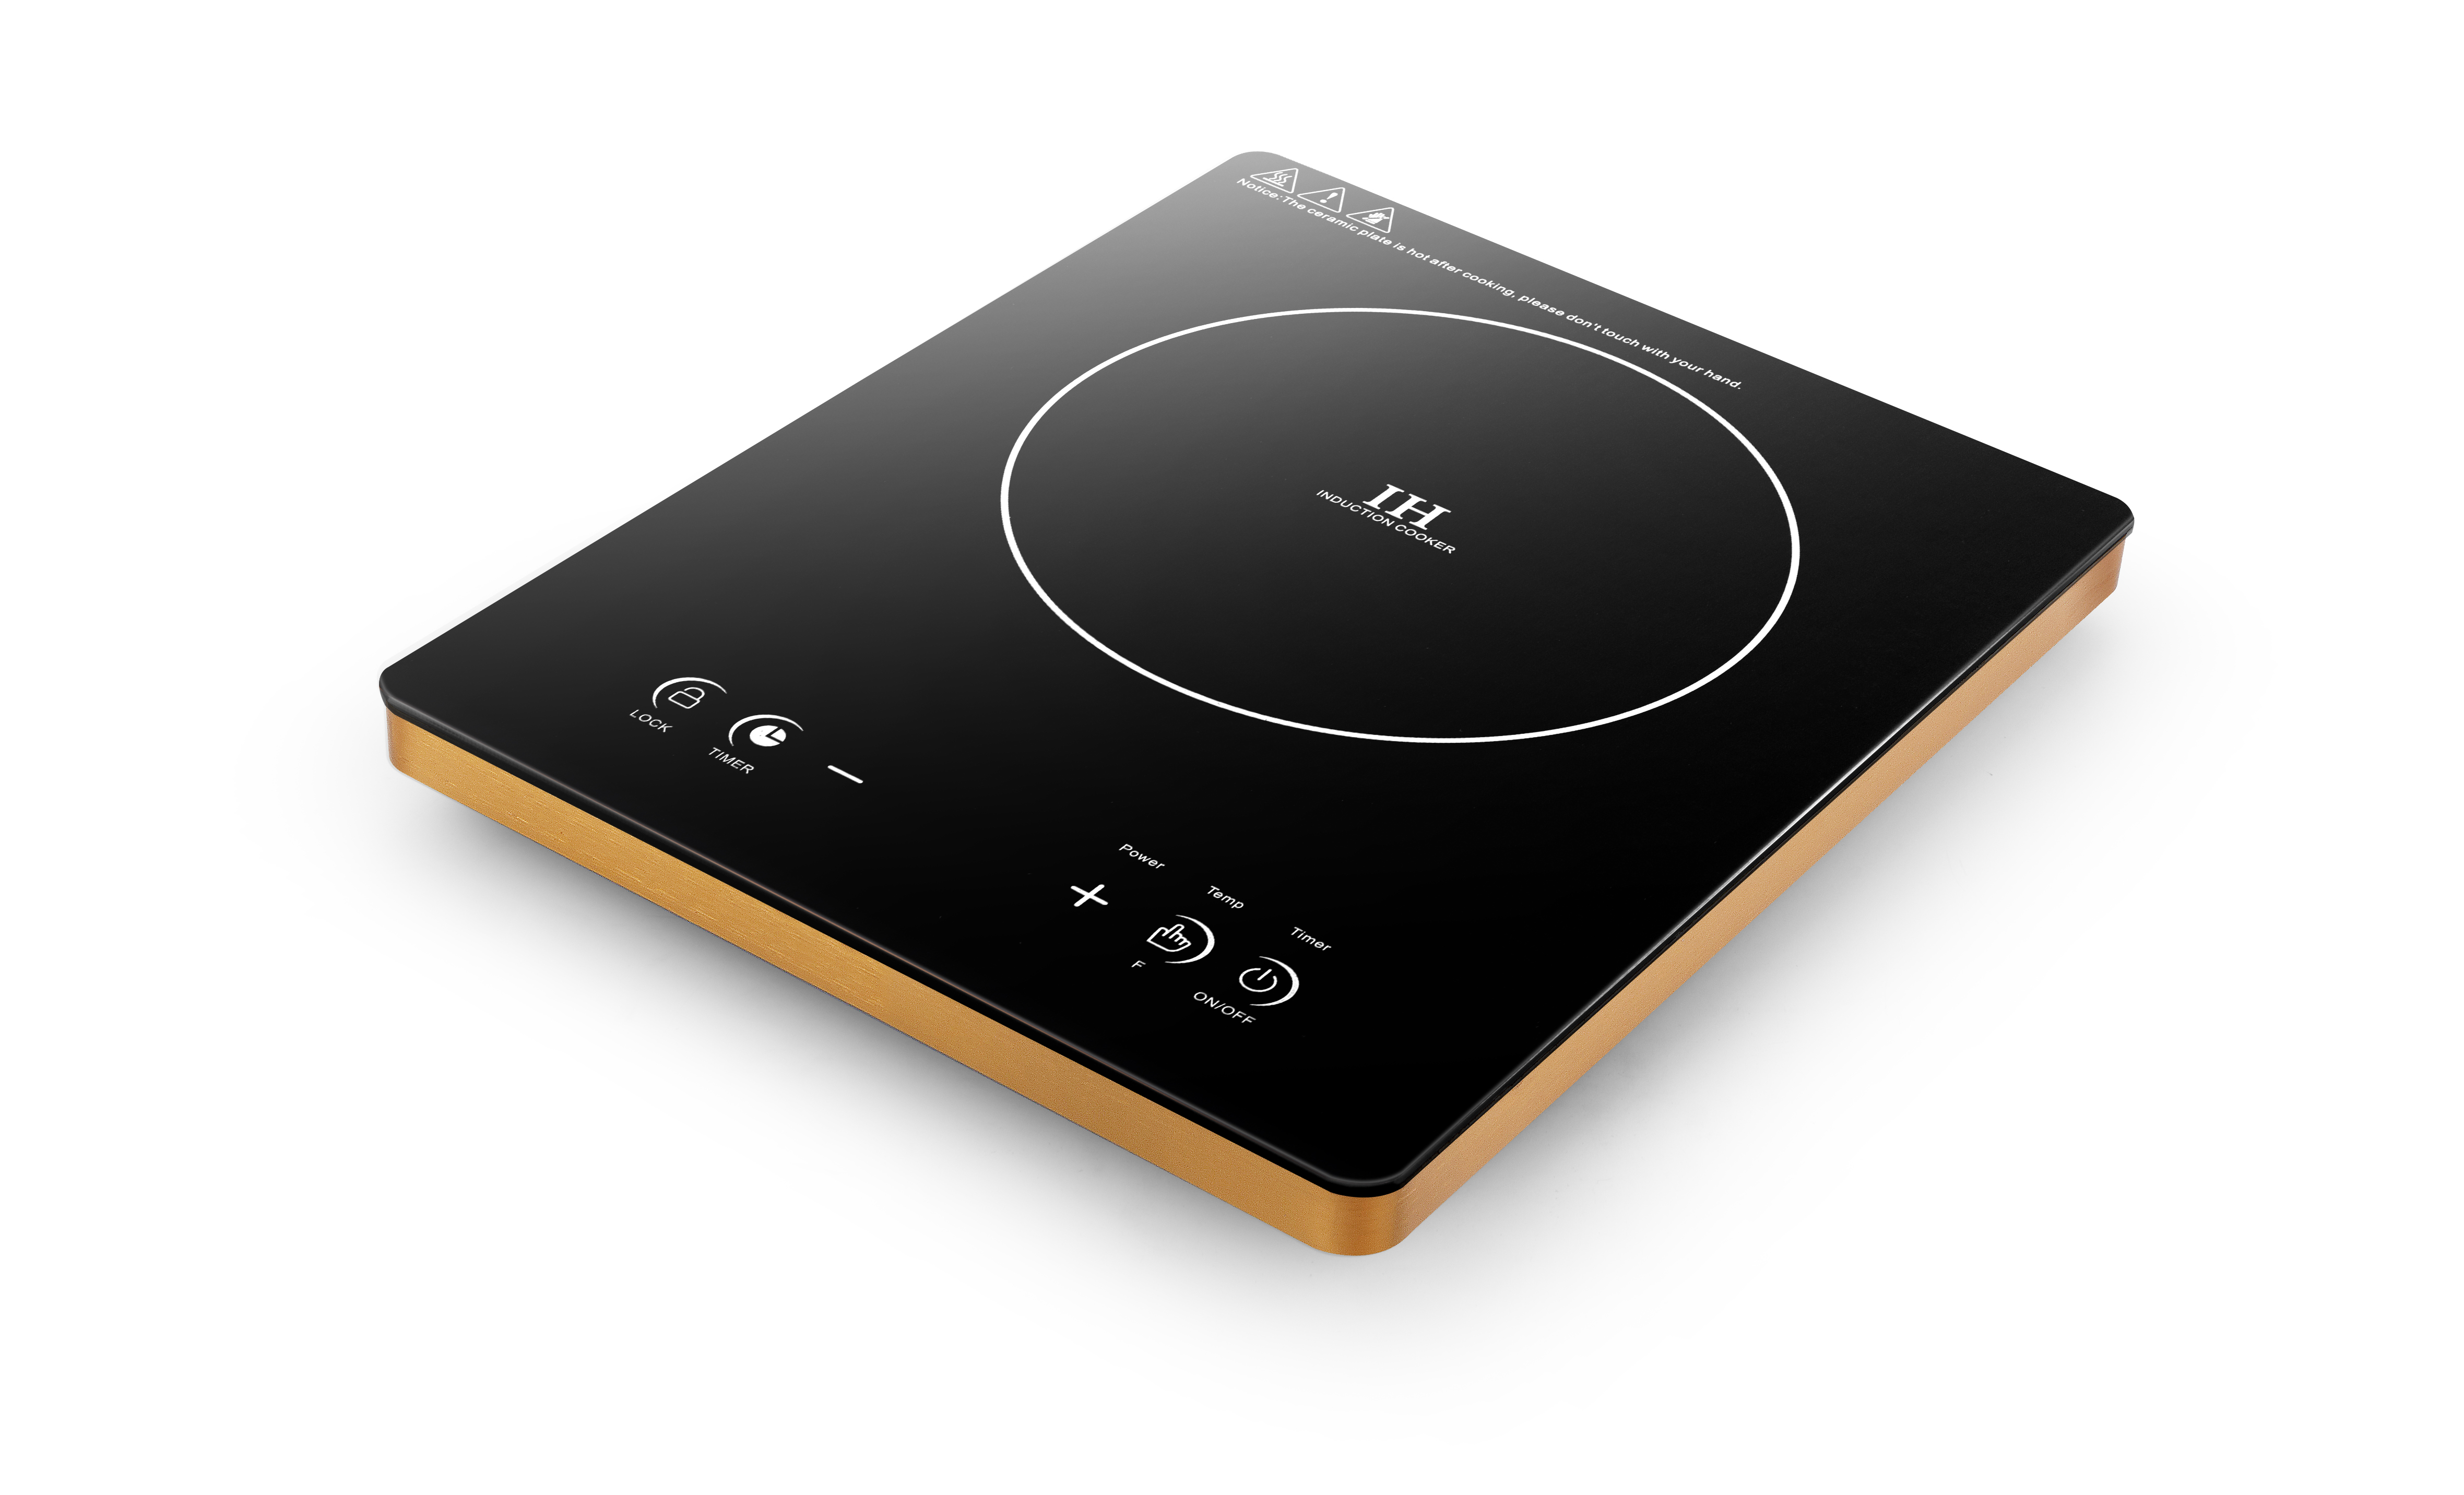 Customizable Single Burner Household Induction Cooker, Over-hear and Over-voltage Protection, Multifunctional Sensor Touch Control, LED Display, Child Safety Lock, AM-D120